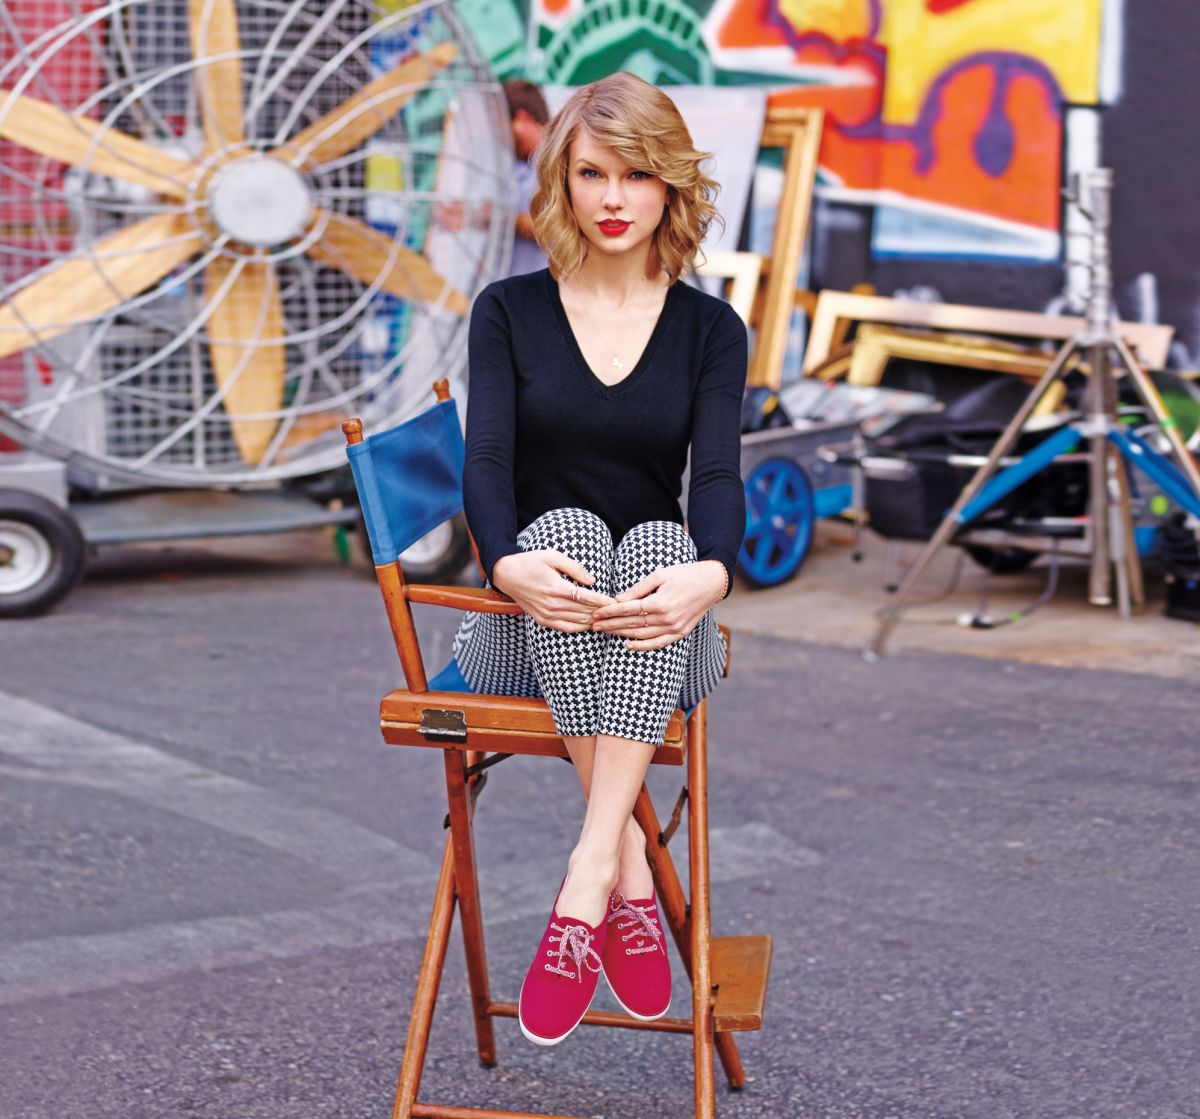 Taylor Swift Dewey Nicks Photoshoot For Keds Collection